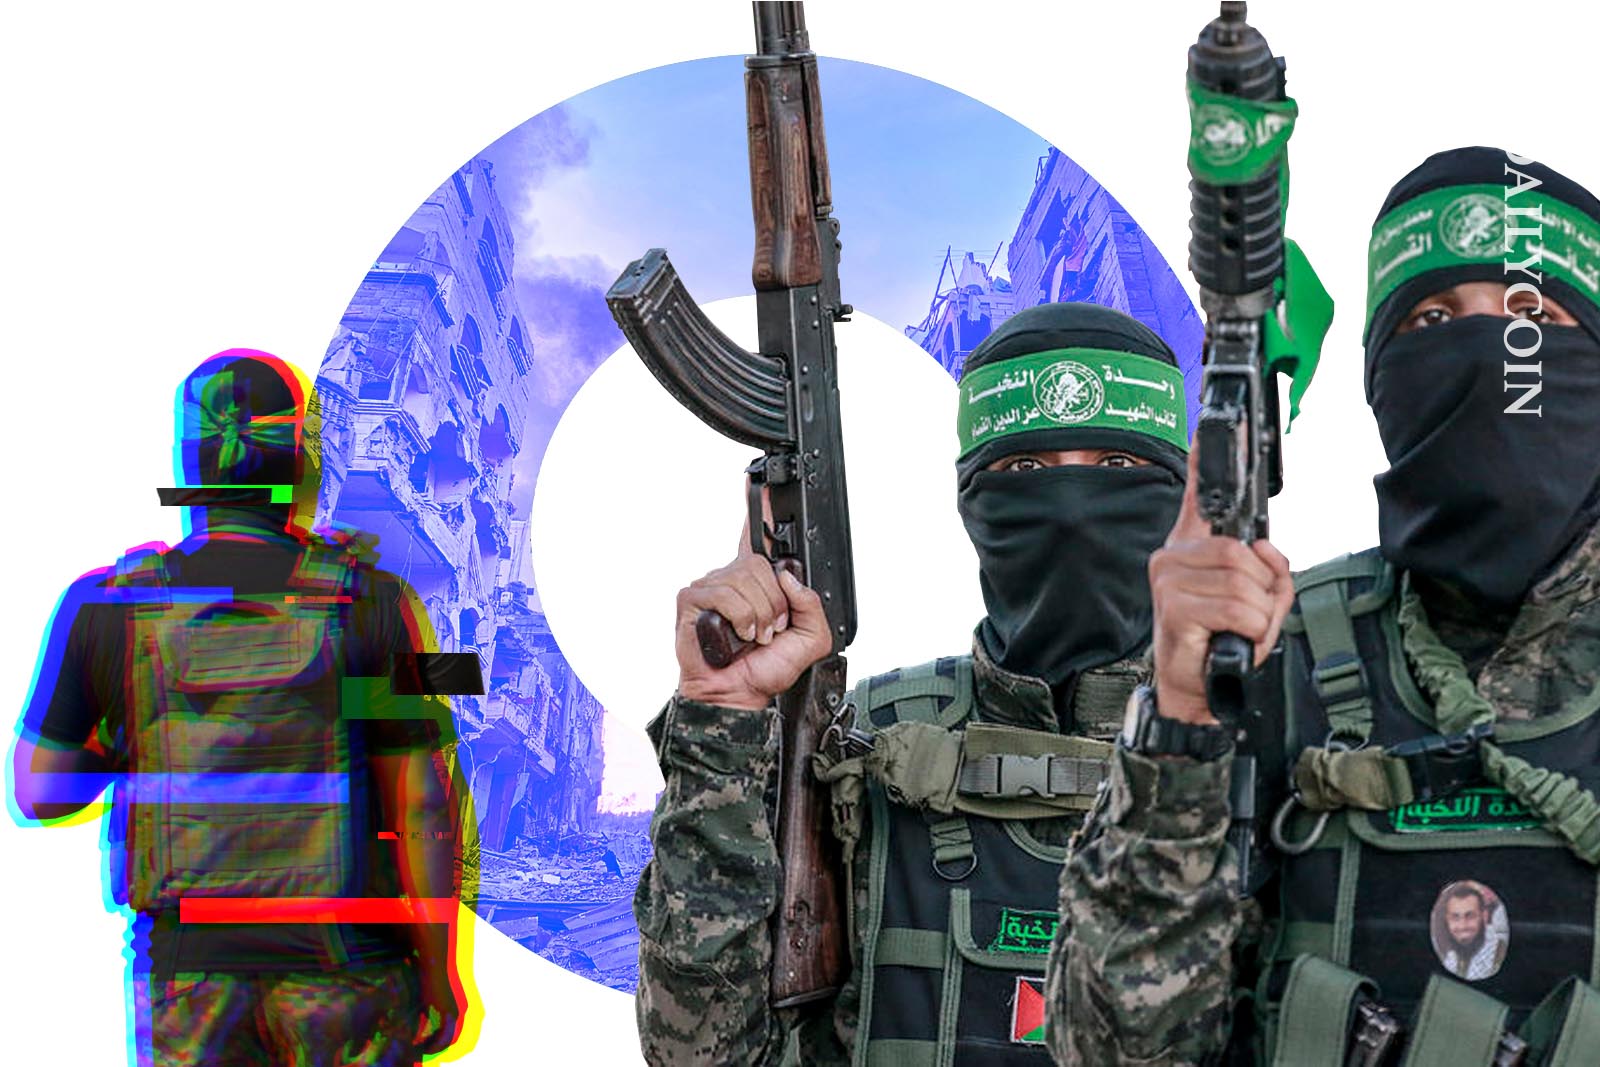 Hamas fighters staring at the camera, whilst one of them digitally decaying.